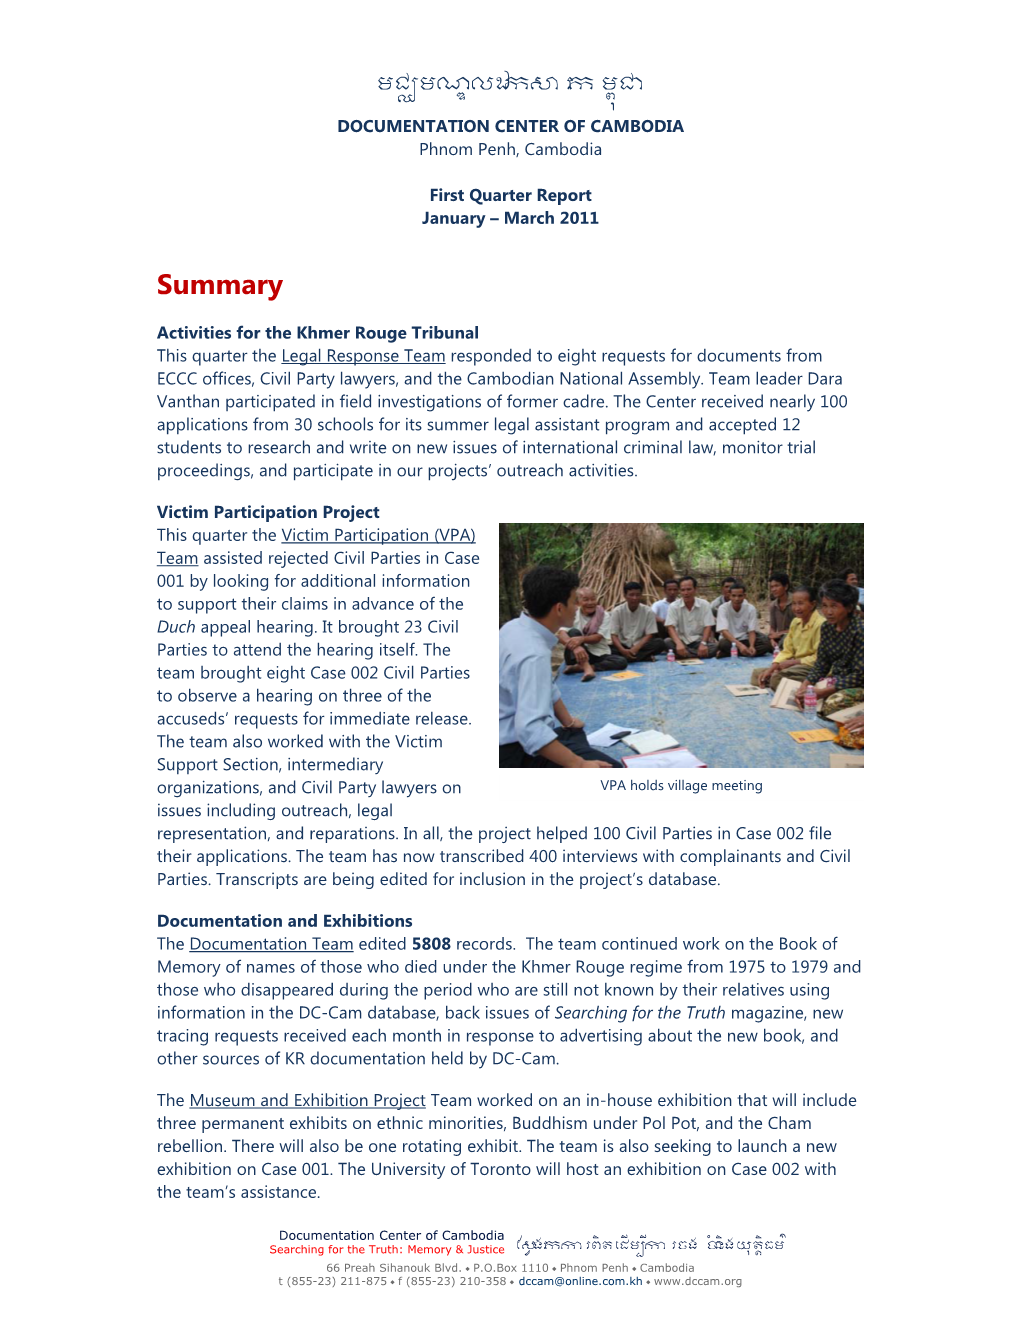 First Quarter Report, January – March 2011 Page | 2